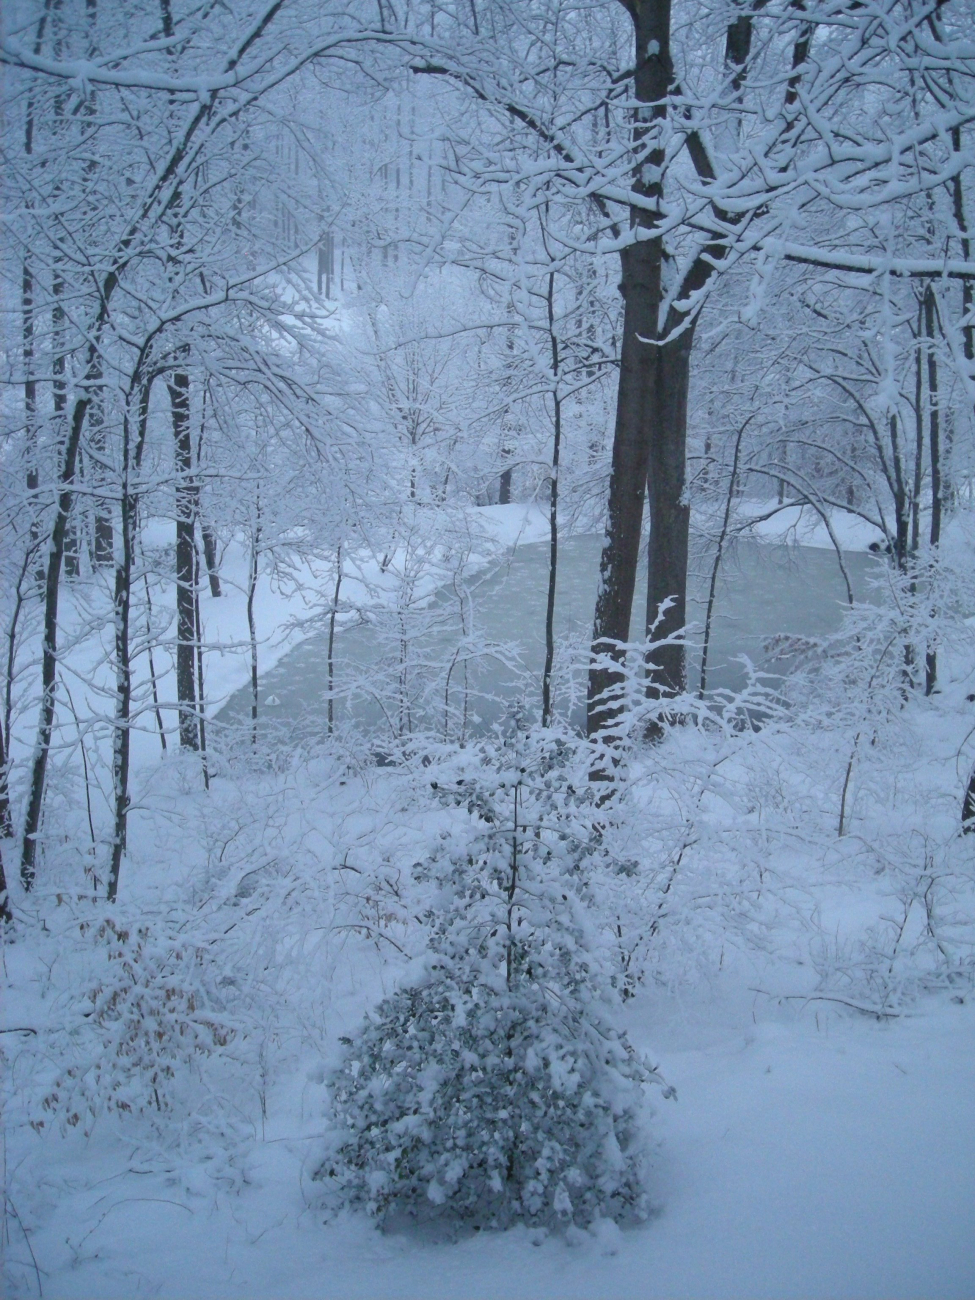 A winter wonderland of snow, trees, and a frozen pond just prior to the twogreat snowstorms of February 2010